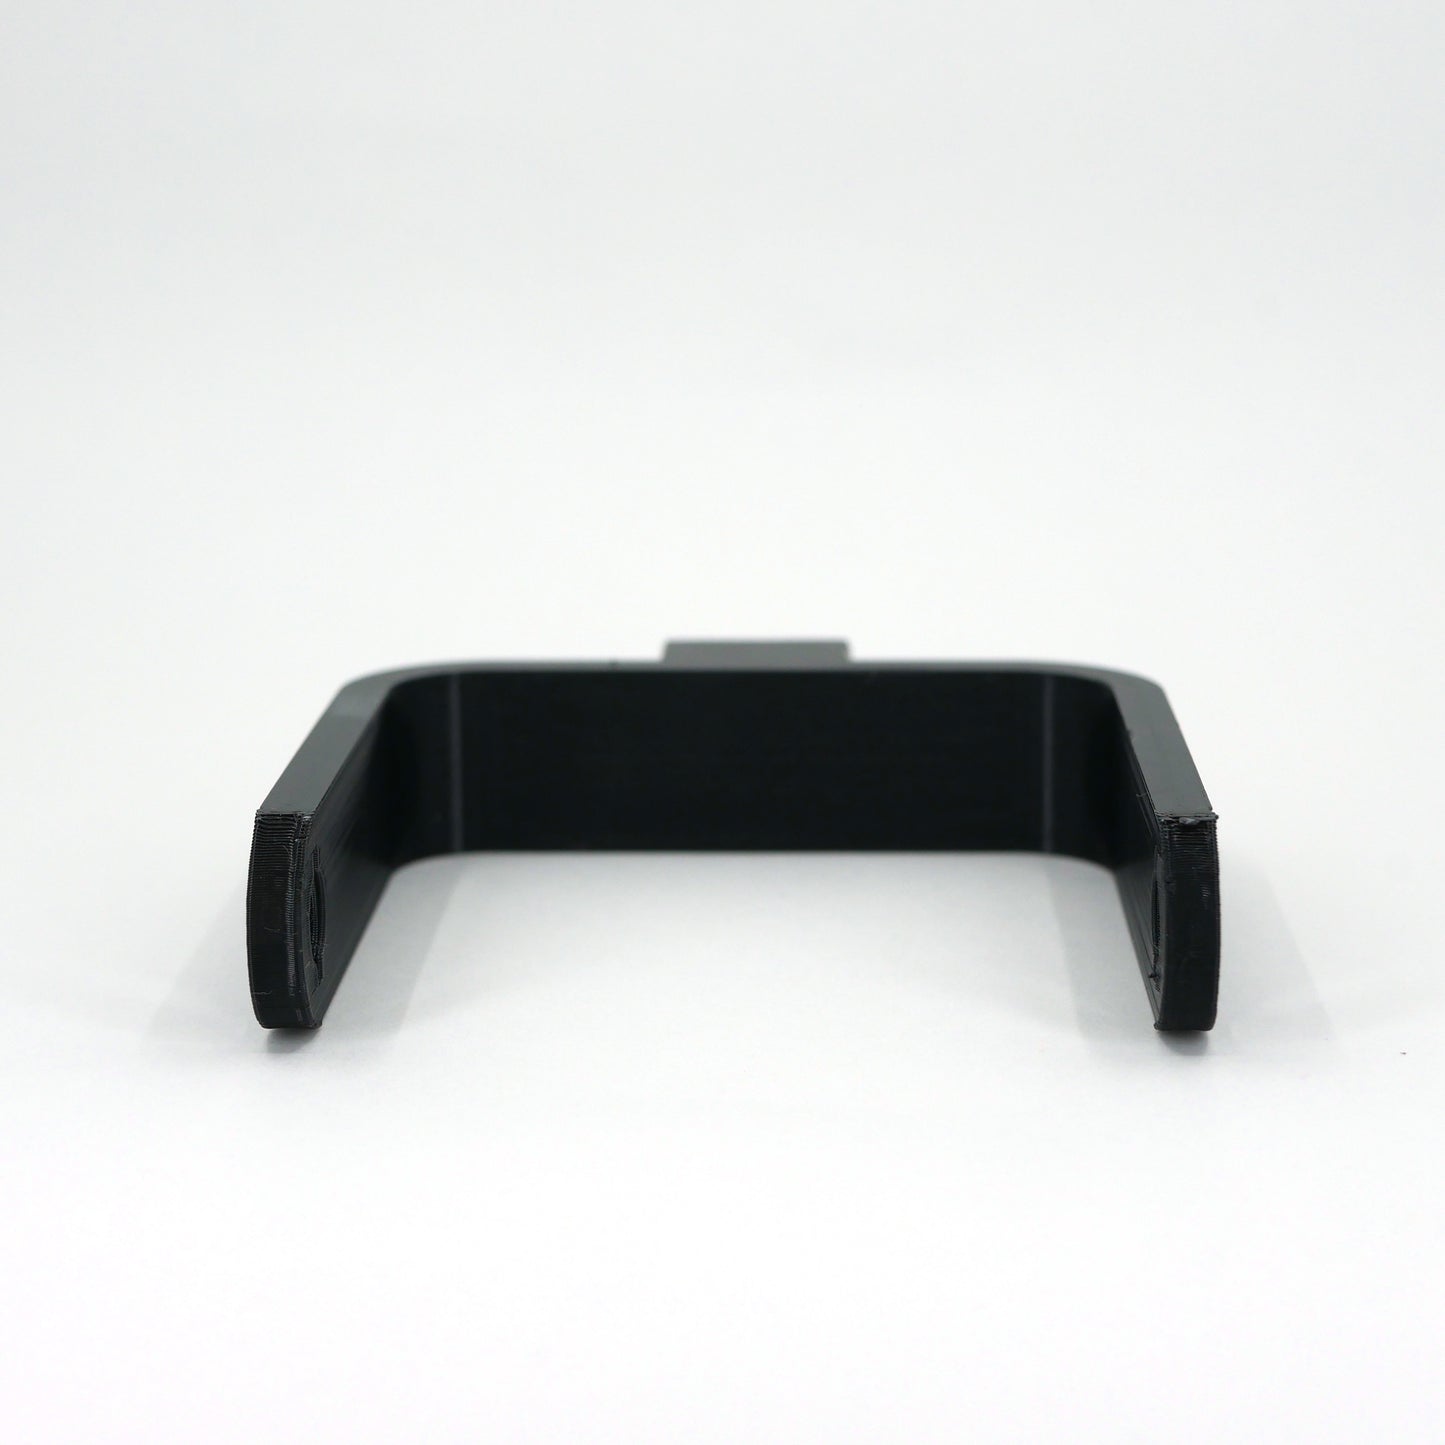 The front of a black microphone mount for the FIFINE K690 microphone.